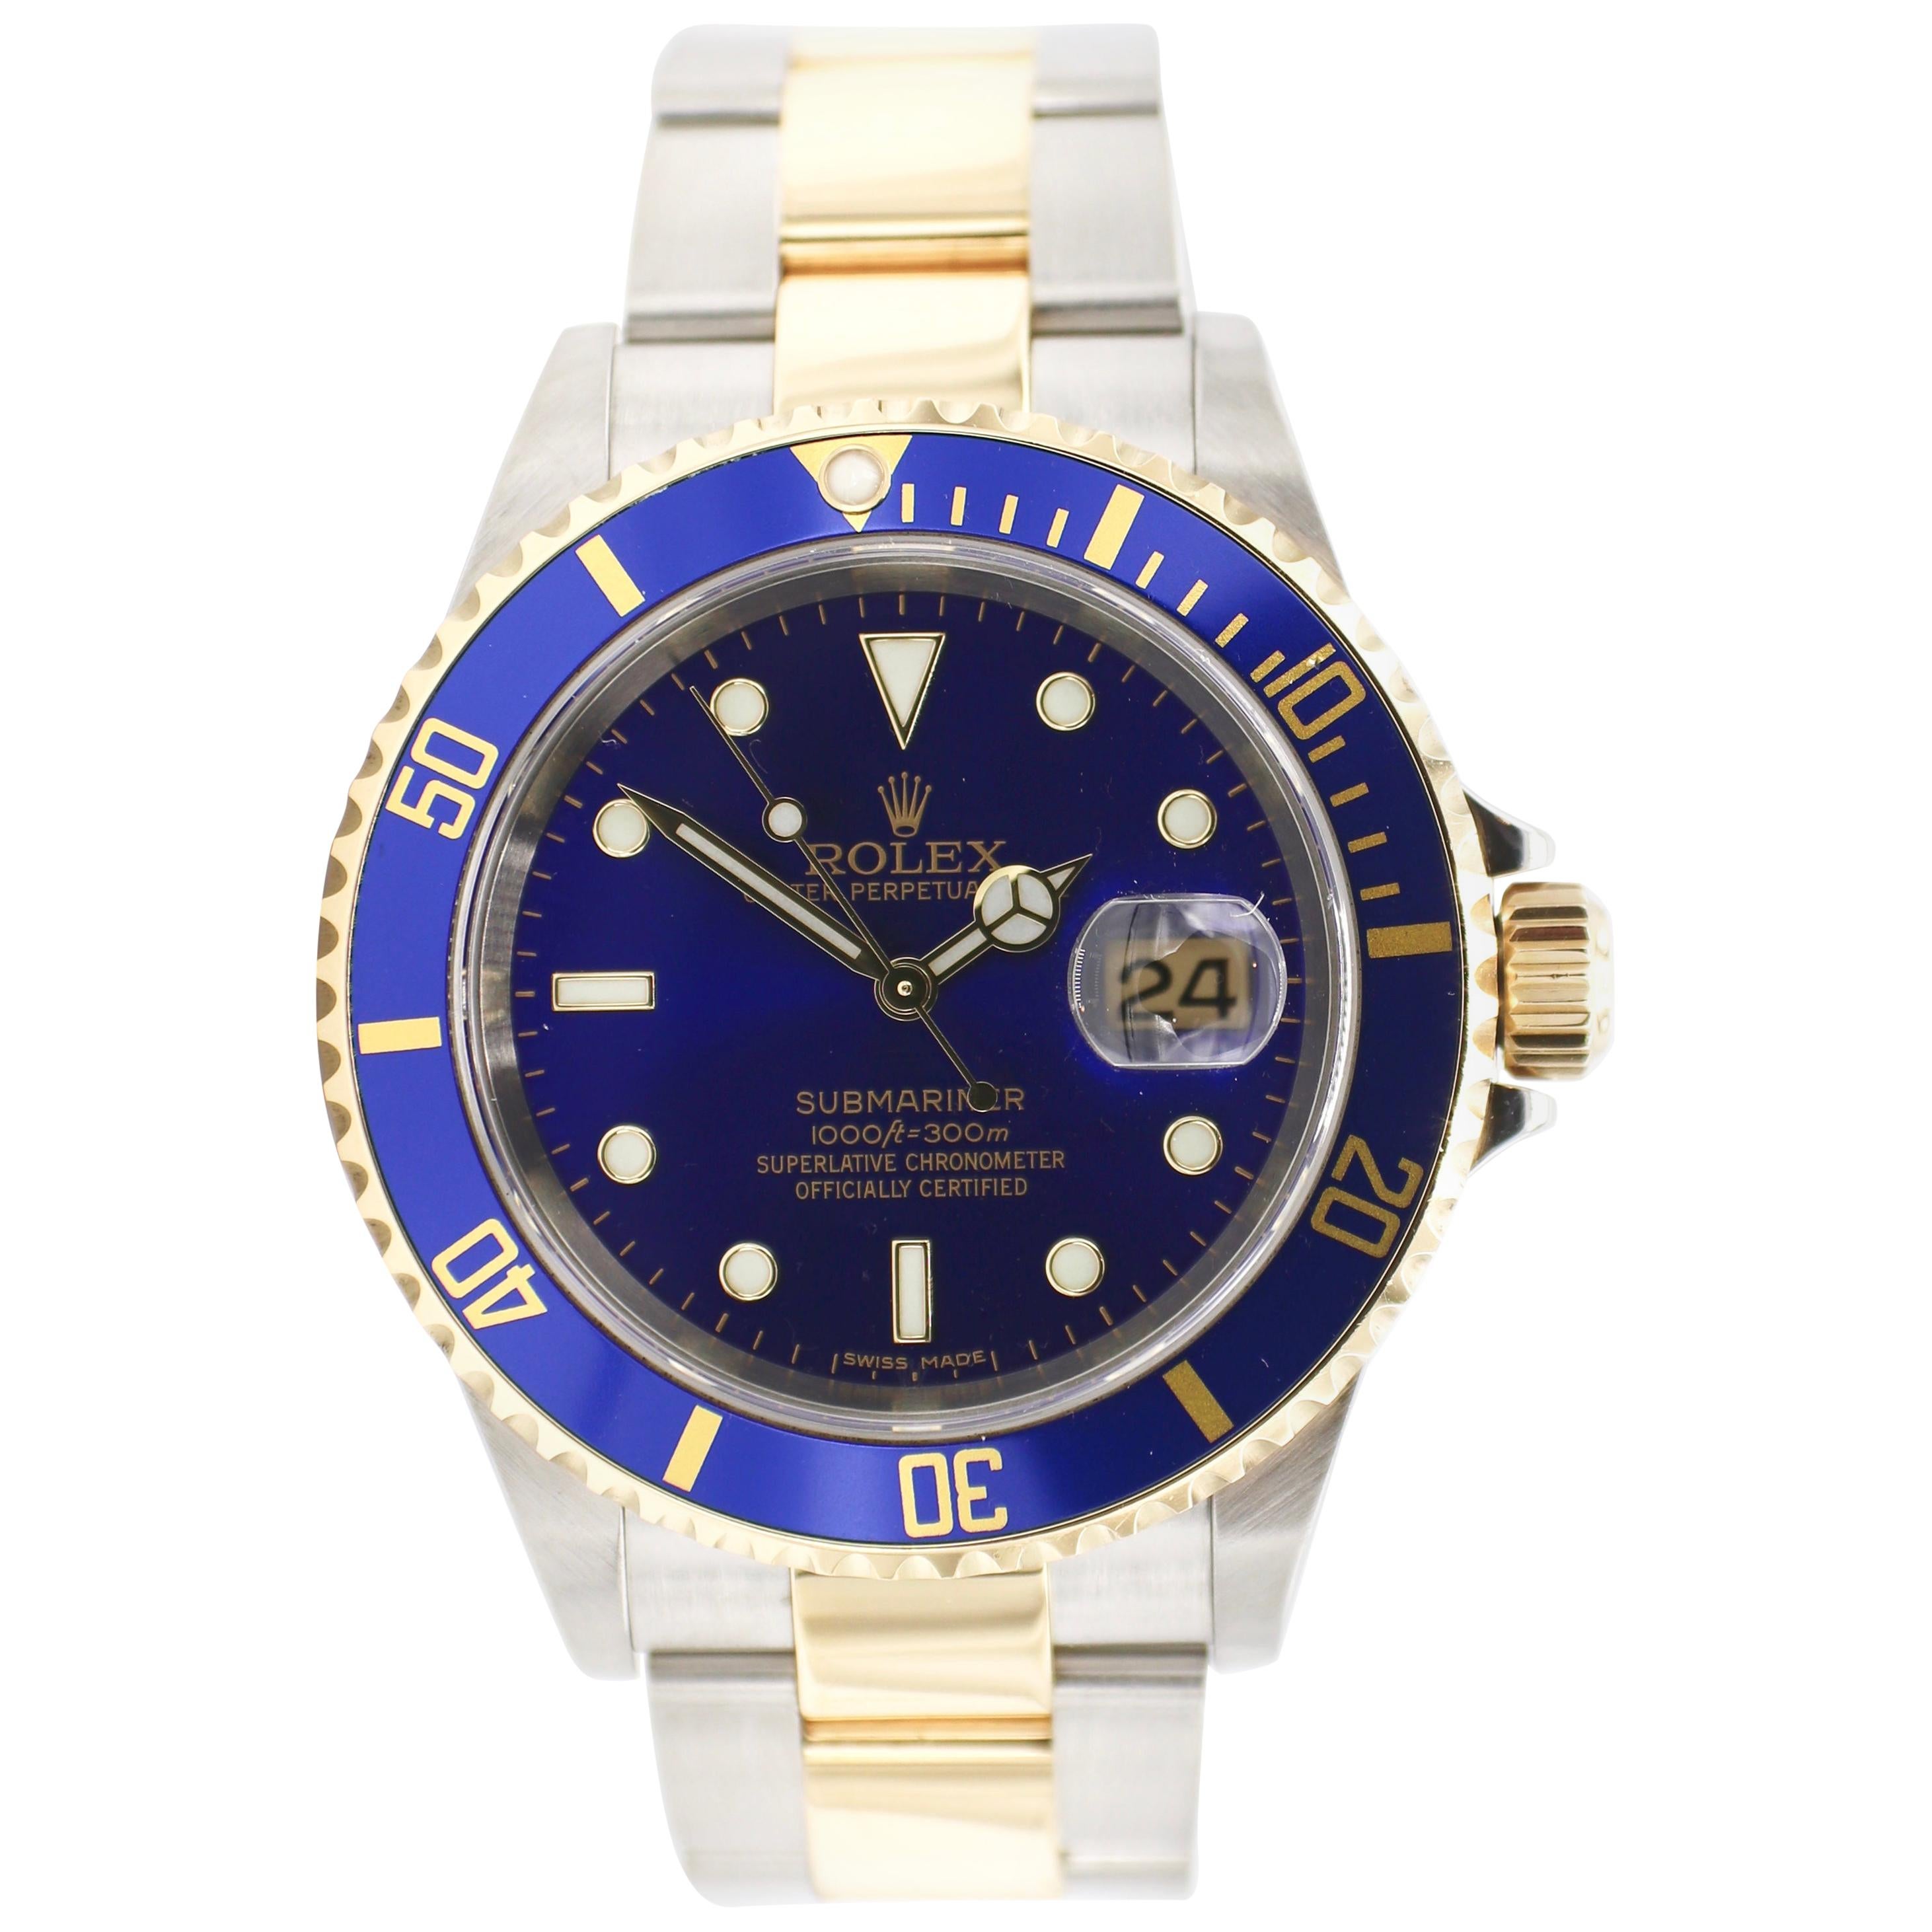 Rolex Submariner Reference 16613 Two-Tone Gold Stainless Blue Dial/Bezel Watch